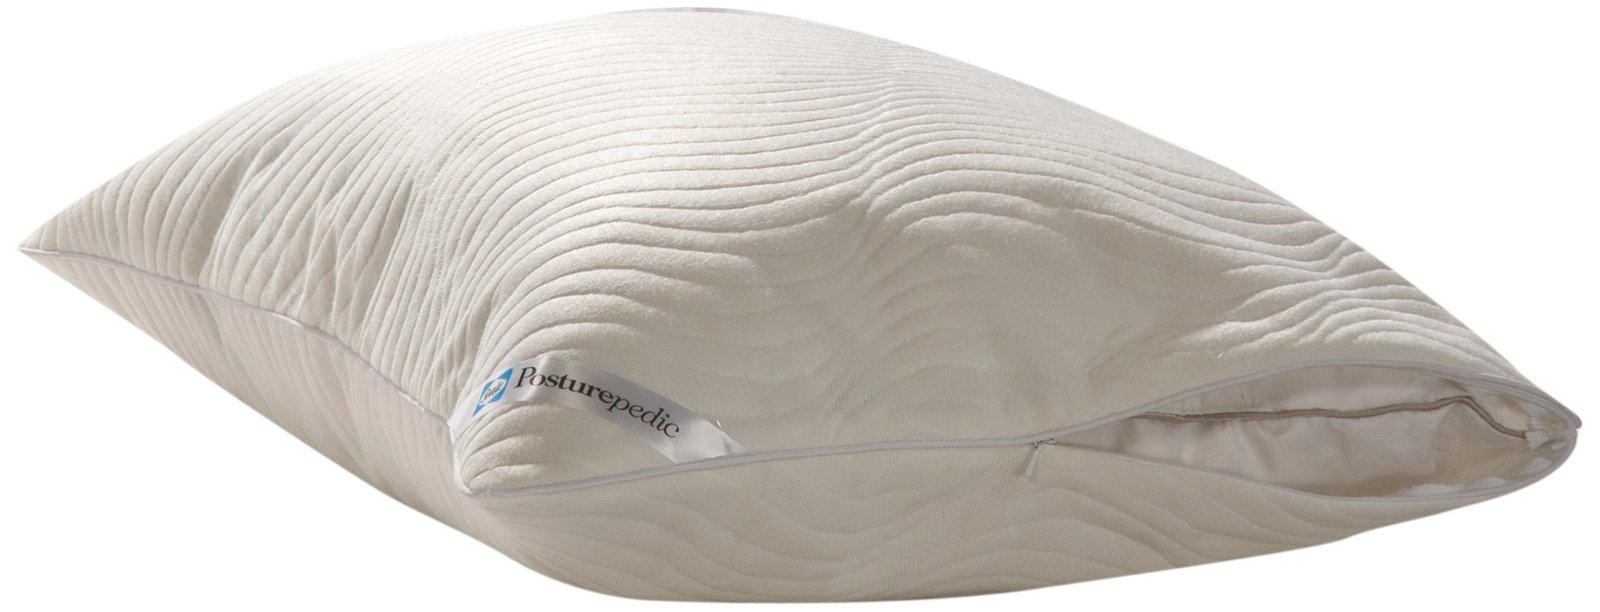 sealy cooling comfort textured mattress protector